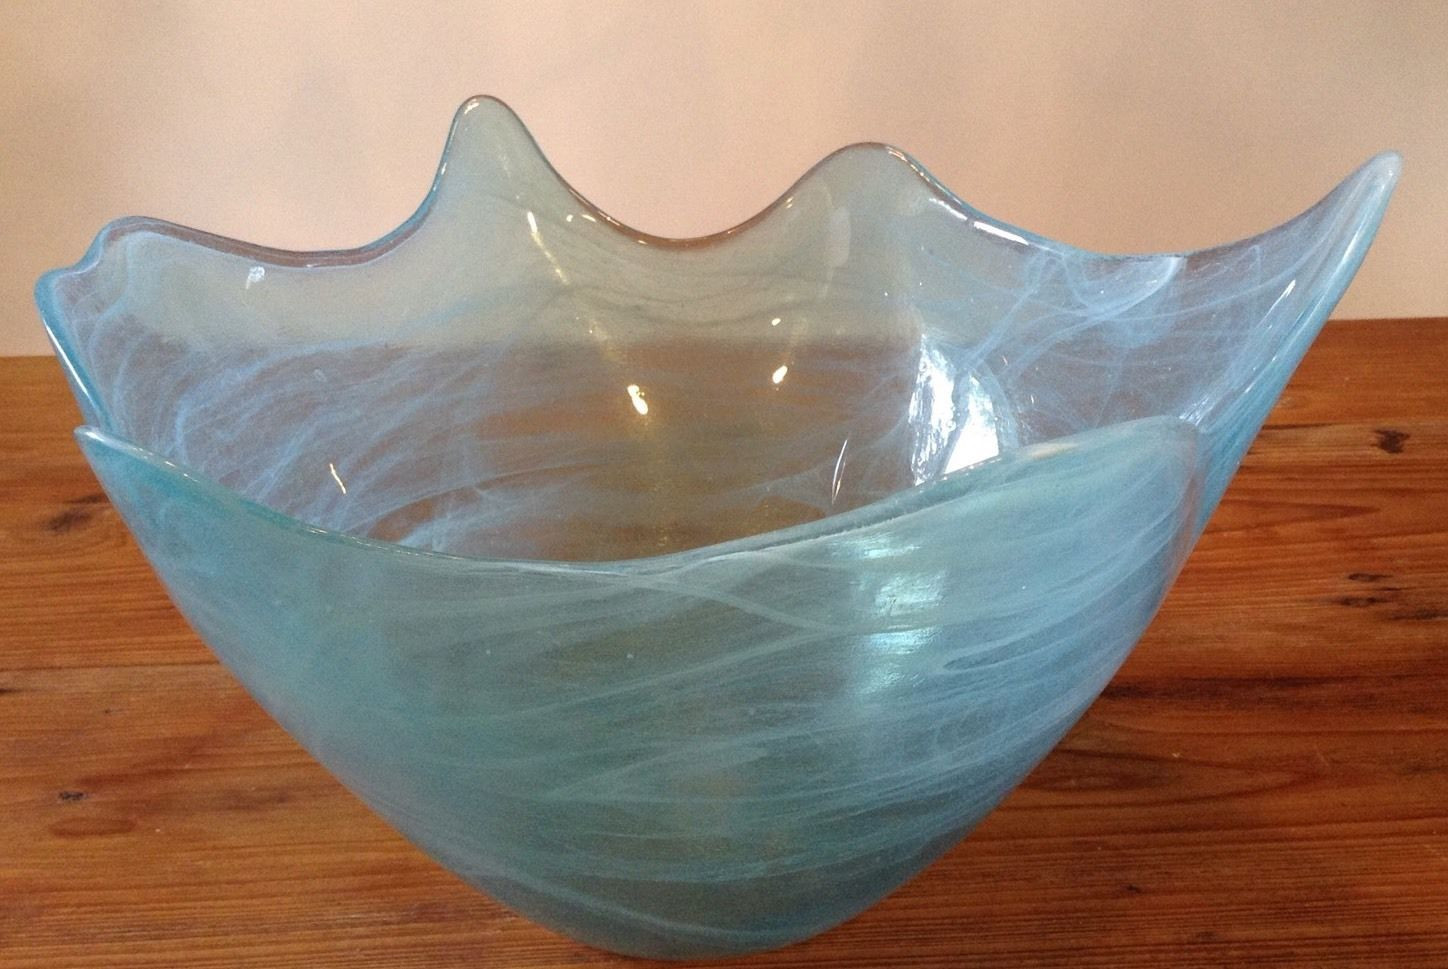 26 Cute Vidrios San Miguel Glass Vase 2024 free download vidrios san miguel glass vase of new vidrios san miguel 100 recycled glass spain turquoise blue in new vidrios san miguel 100 recycled glass spain turquoise blue scalloped bowl 1 of 6free sh